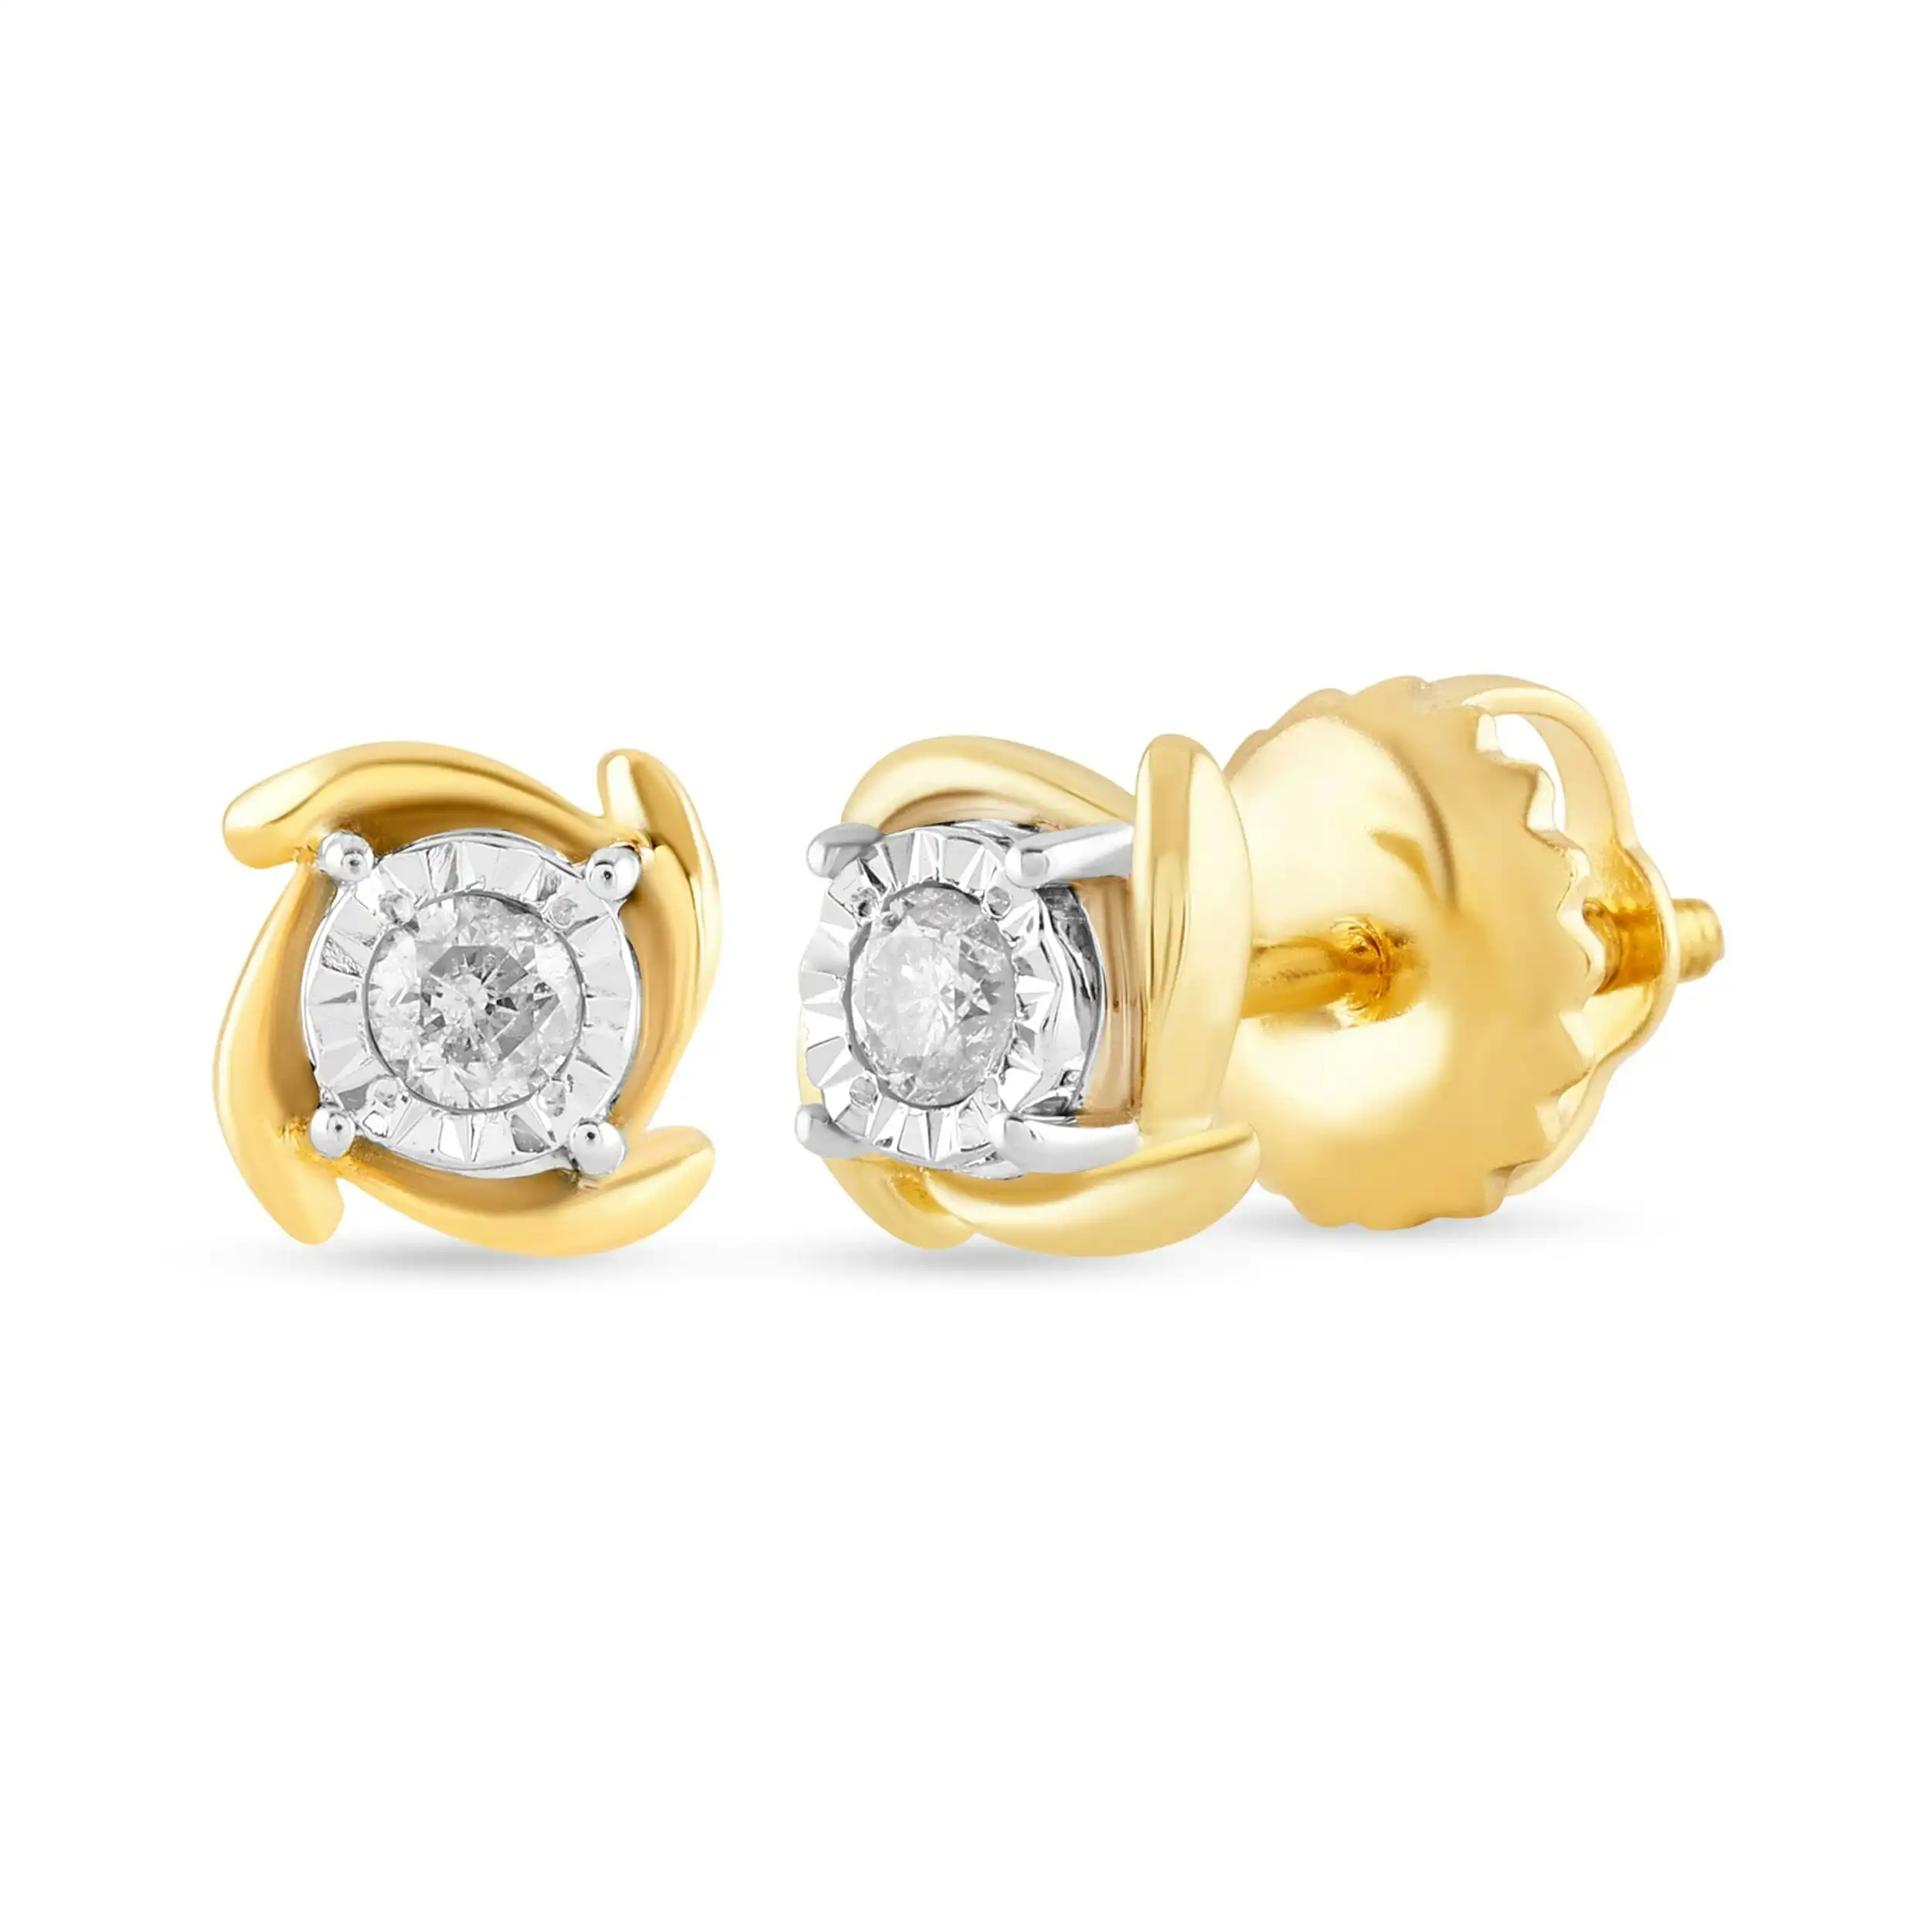 Children's Solitaire Look Stud Earrings with 0.05ct of Diamonds in 9ct Yellow Gold